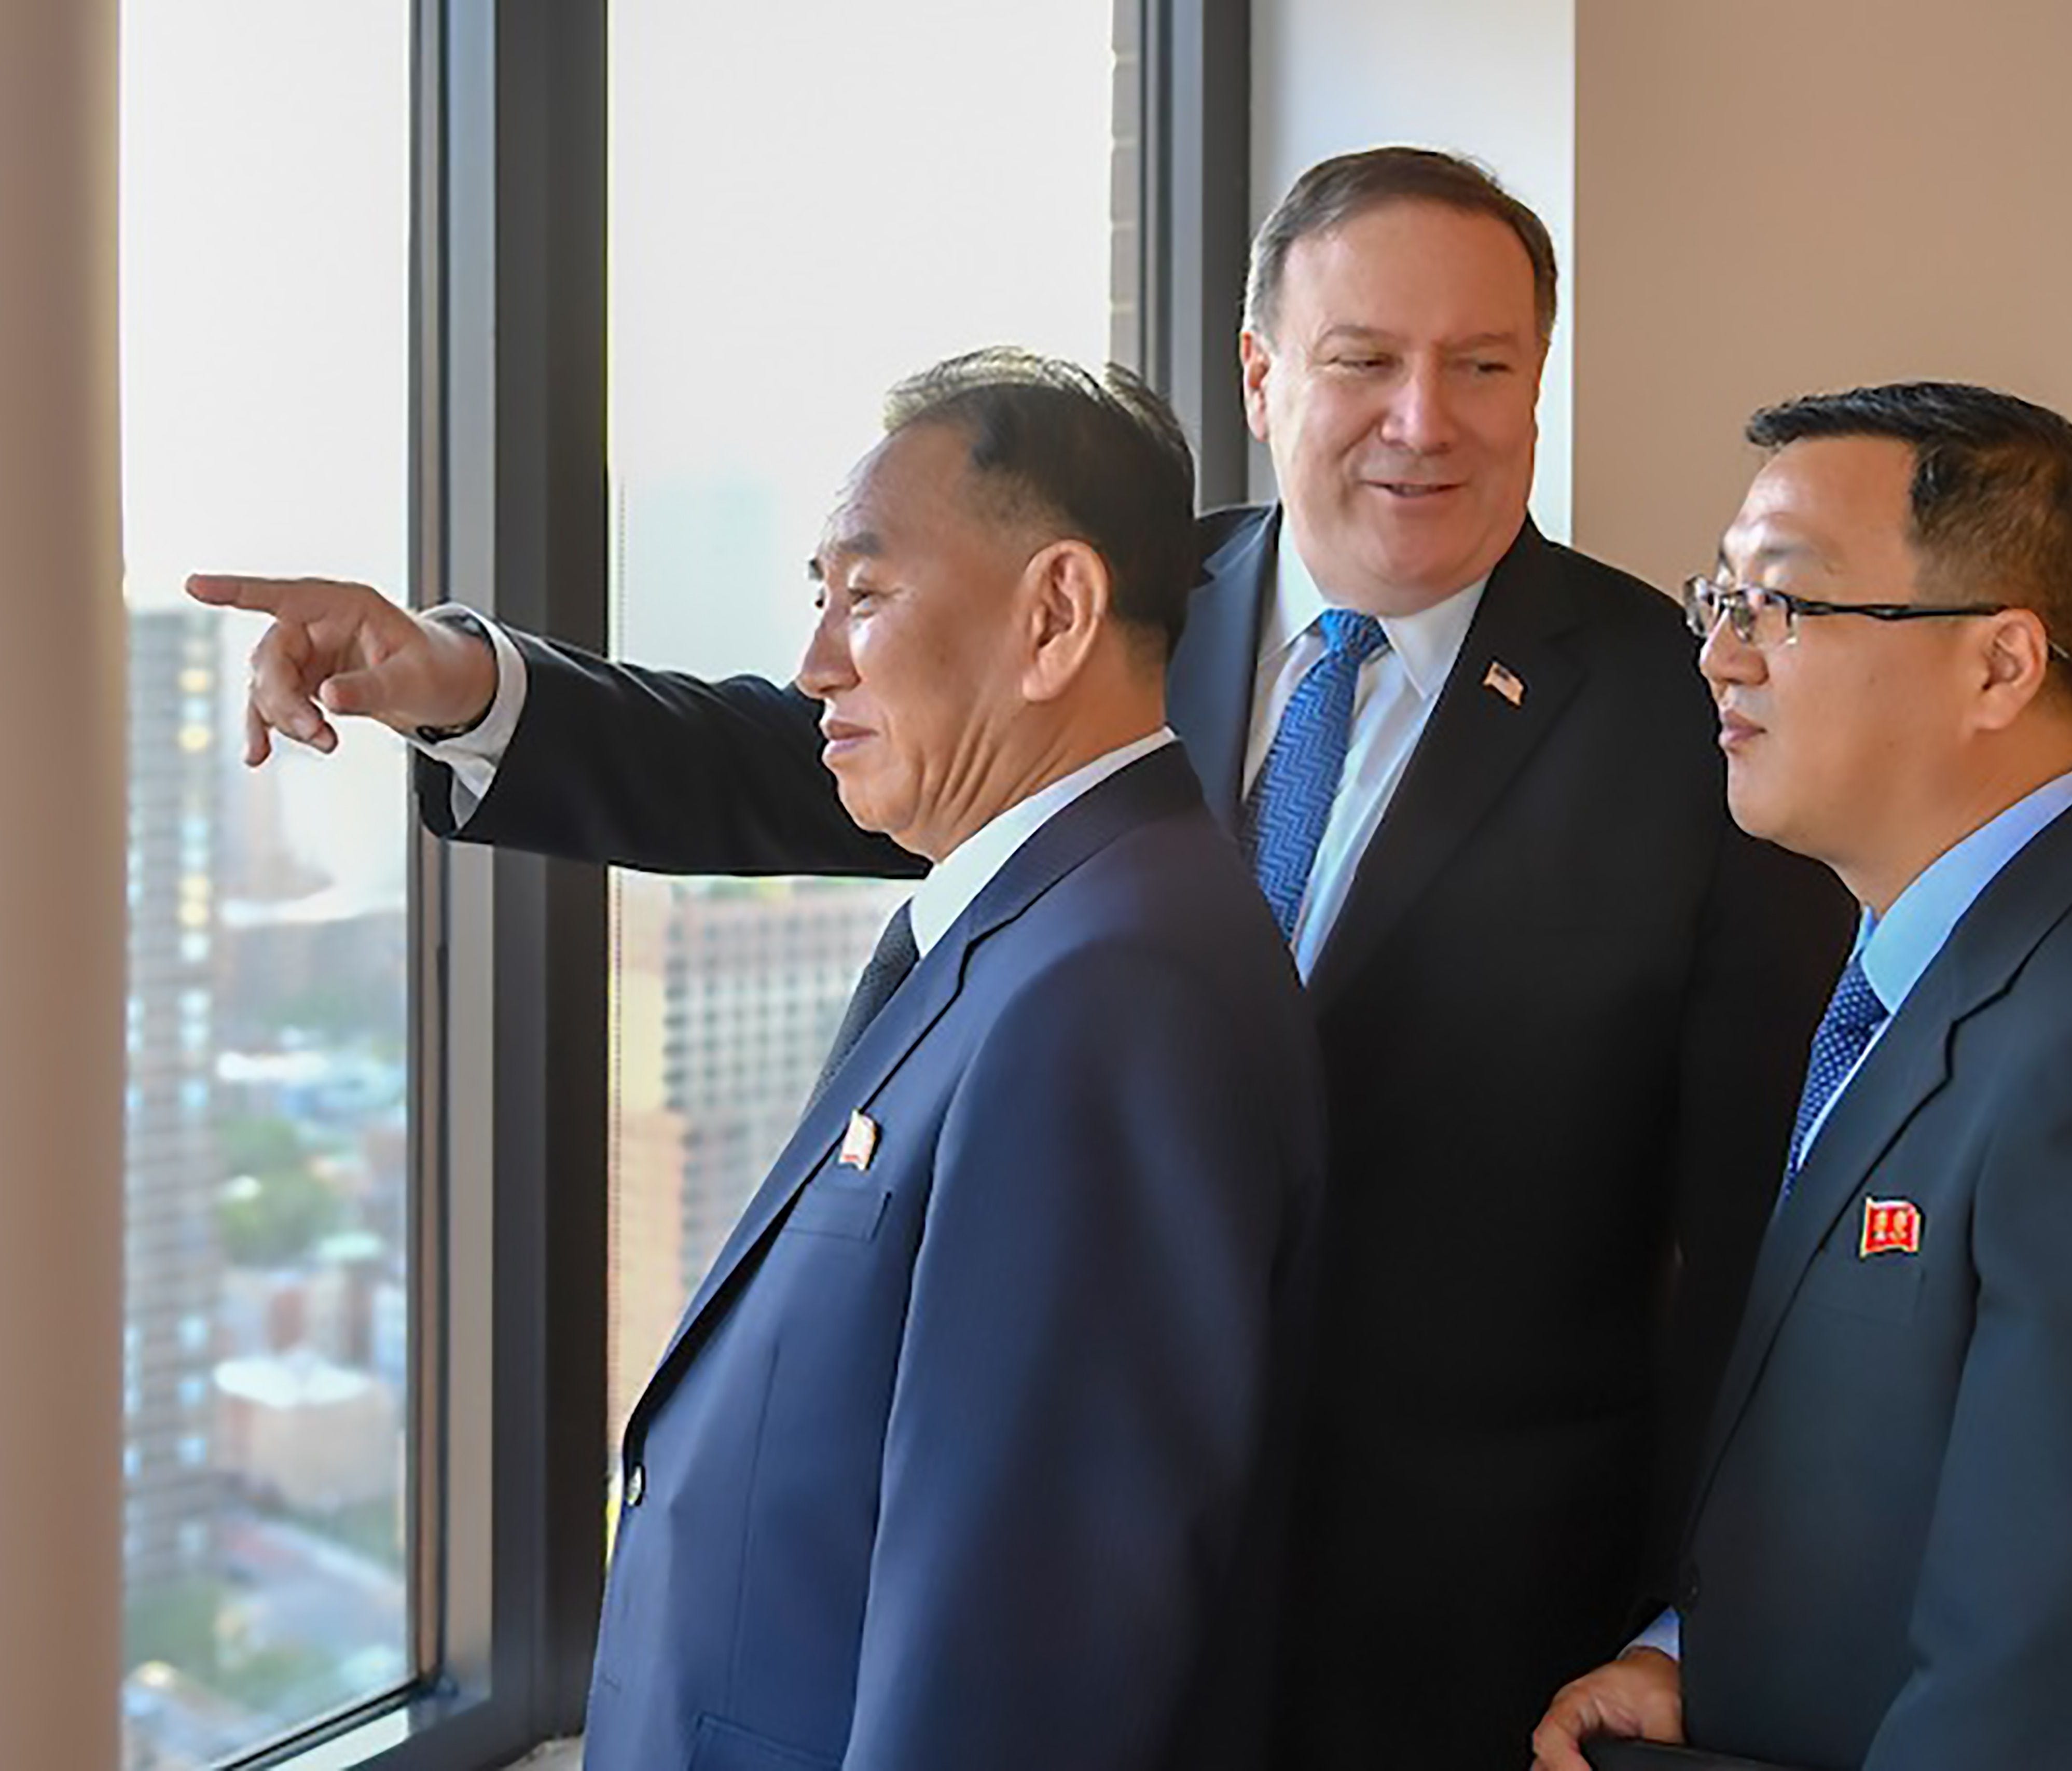 This handout photograph, obtained courtesy of the U.S. State Department, shows Kim Yong Chol (left), Vice Chairman of North Korea, during his meeting with Secretary of State Mike Pompeo (center).